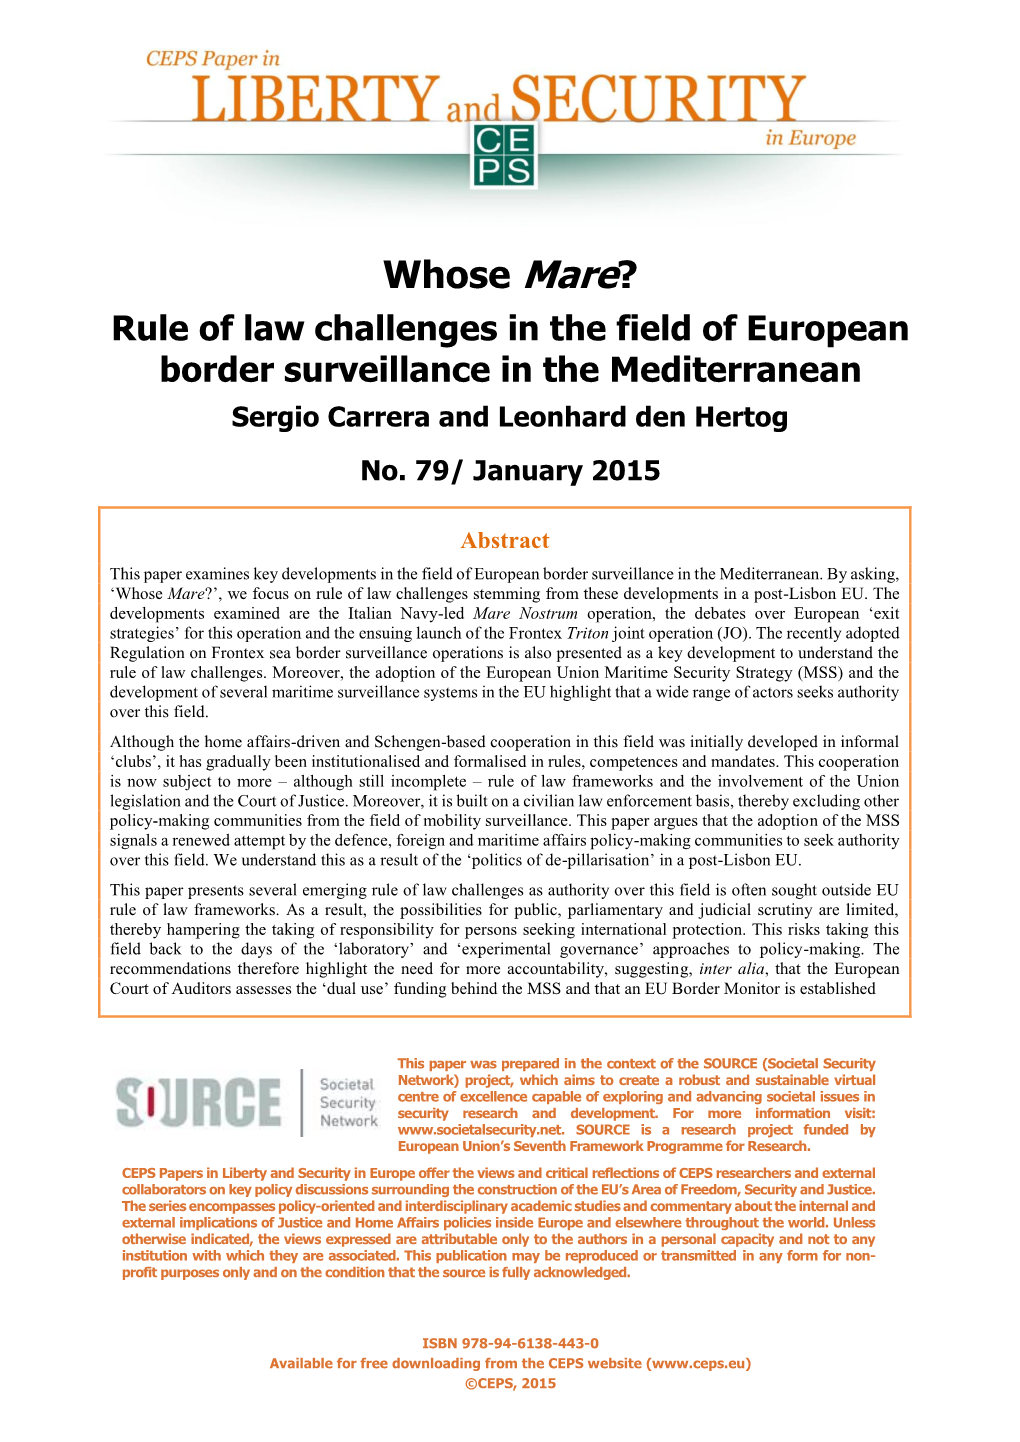 Whose Mare? Rule of Law Challenges in the Field of European Border Surveillance in the Mediterranean Sergio Carrera and Leonhard Den Hertog No